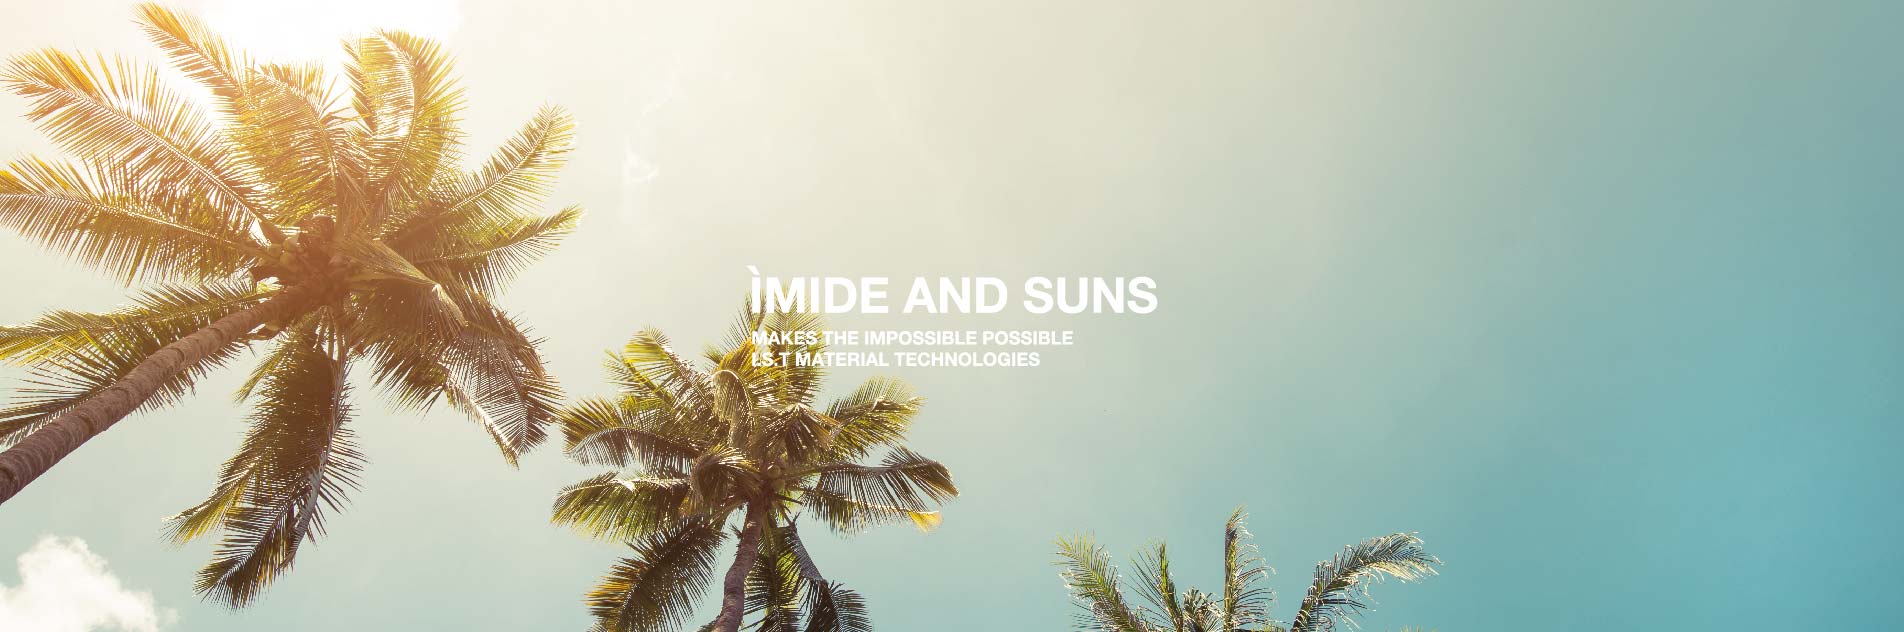 IMIDE AND SUNS